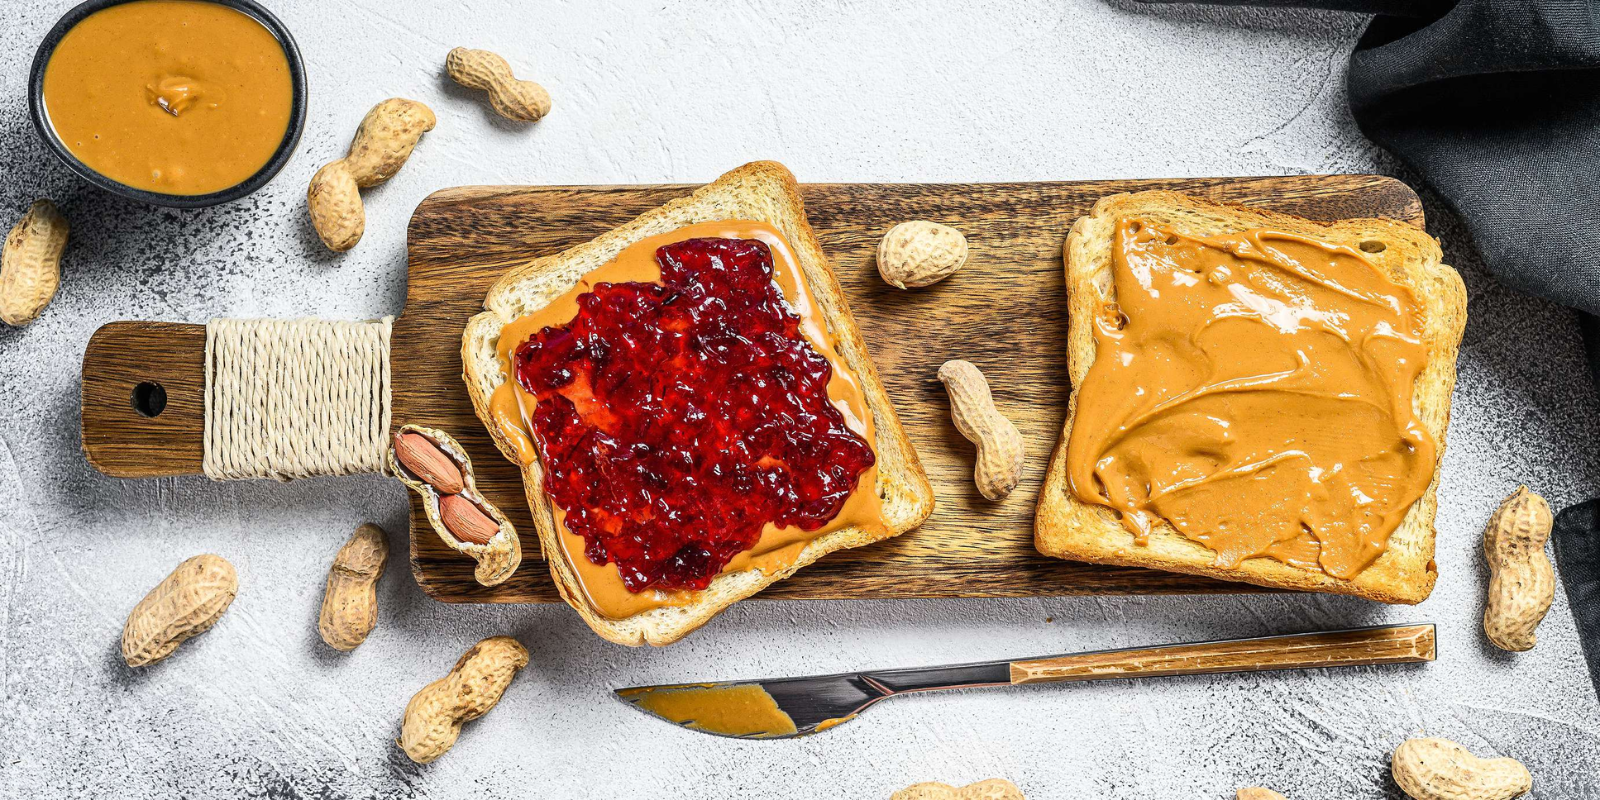 Fun Recipes to Celebrate National Peanut Butter and Jelly Day